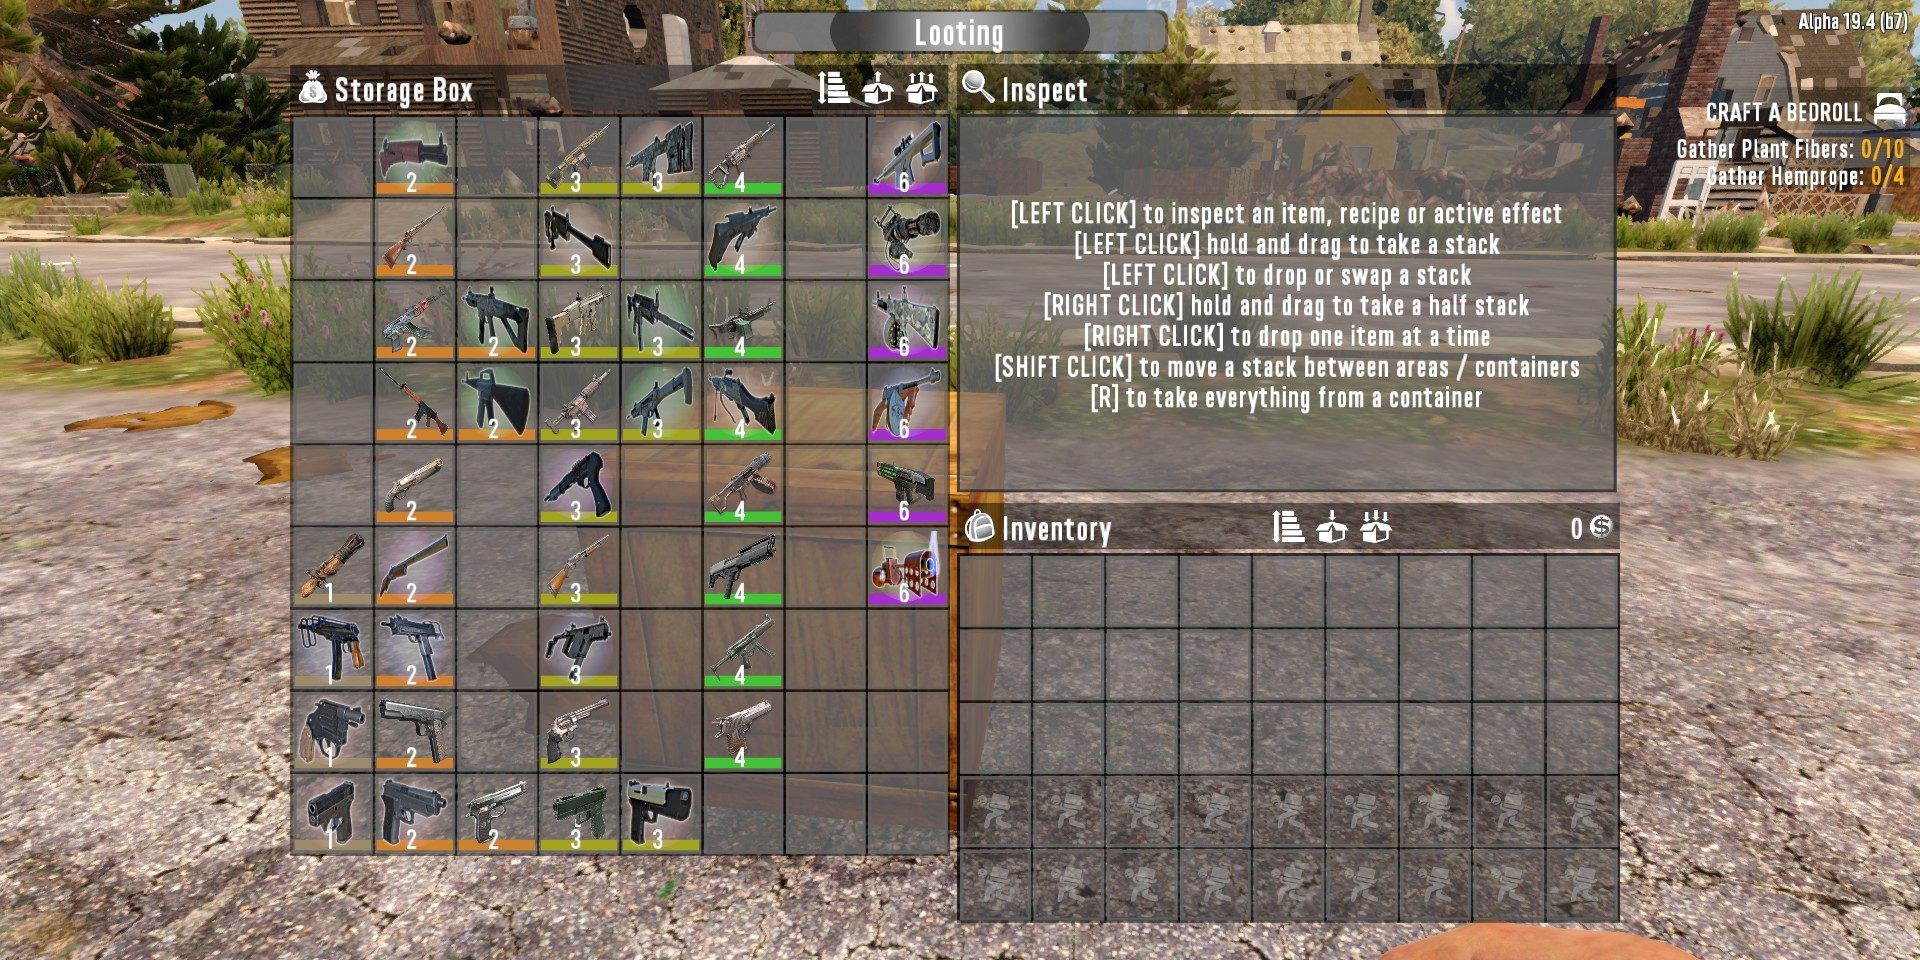 A screenshot of the creative inventory screen in 7 Days To Die, with a rsnge of new gun models with different colours for different levels.